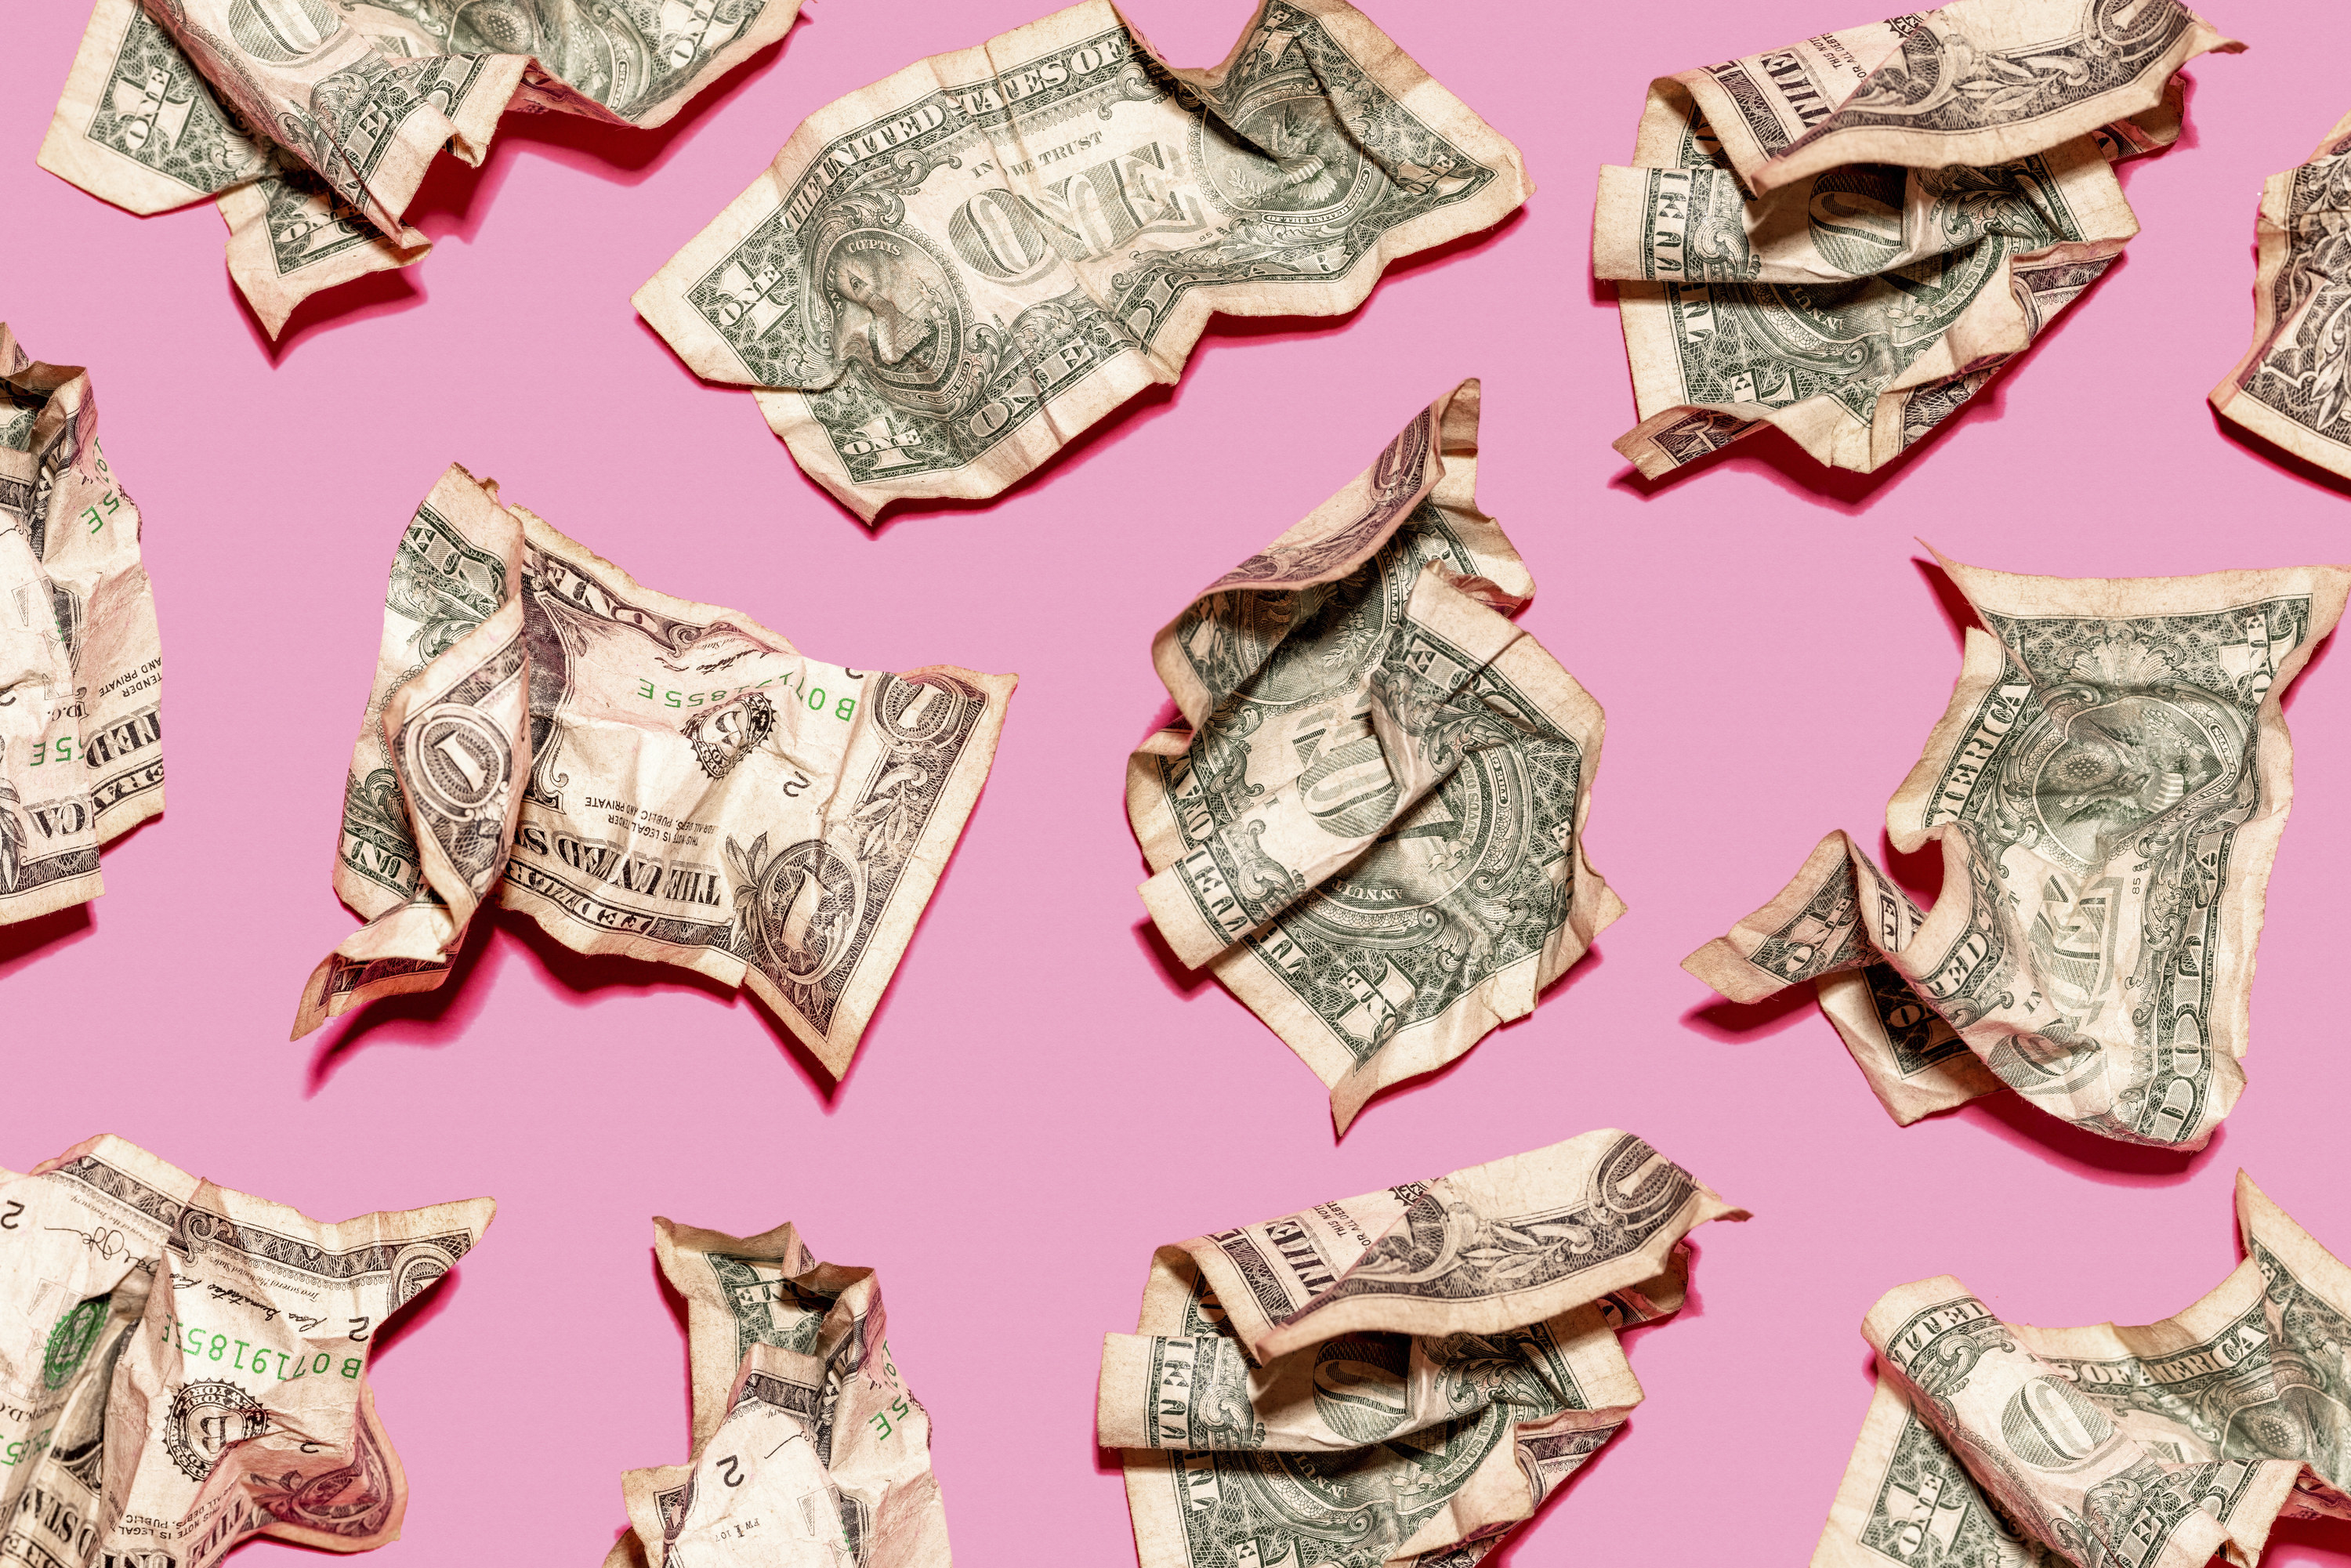 Dollar bills crumbled up against a pink background